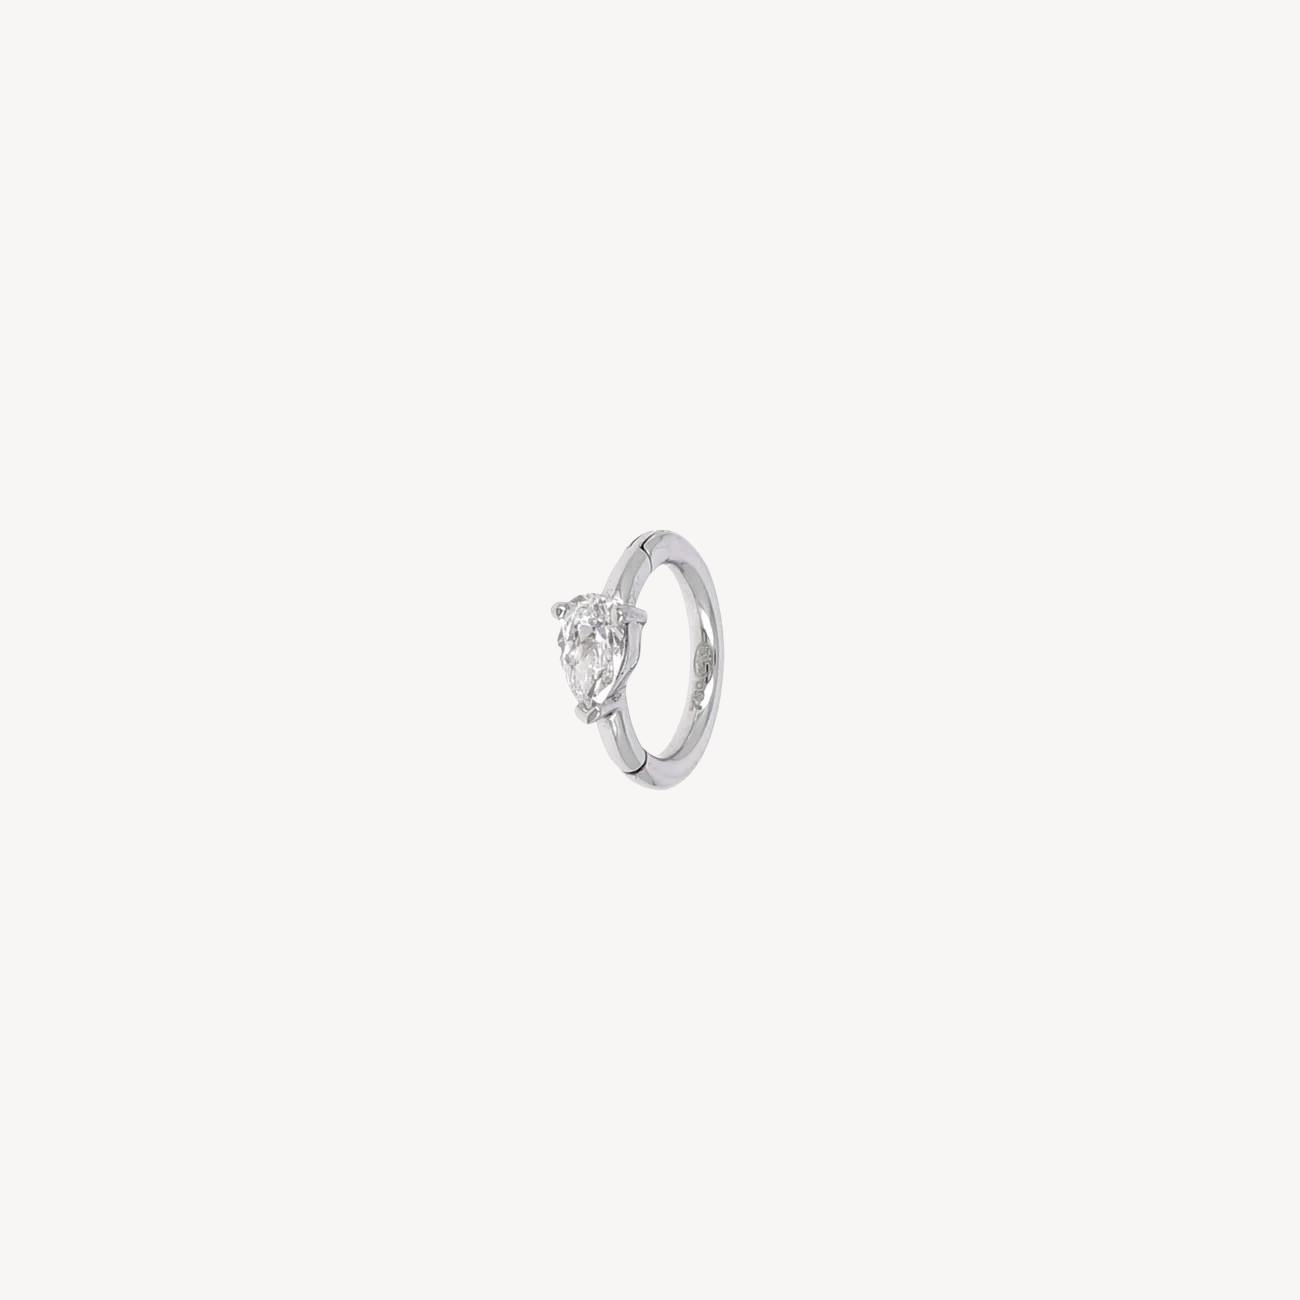 6.5mm White Gold Pear 3.5x2.5mm Hoop